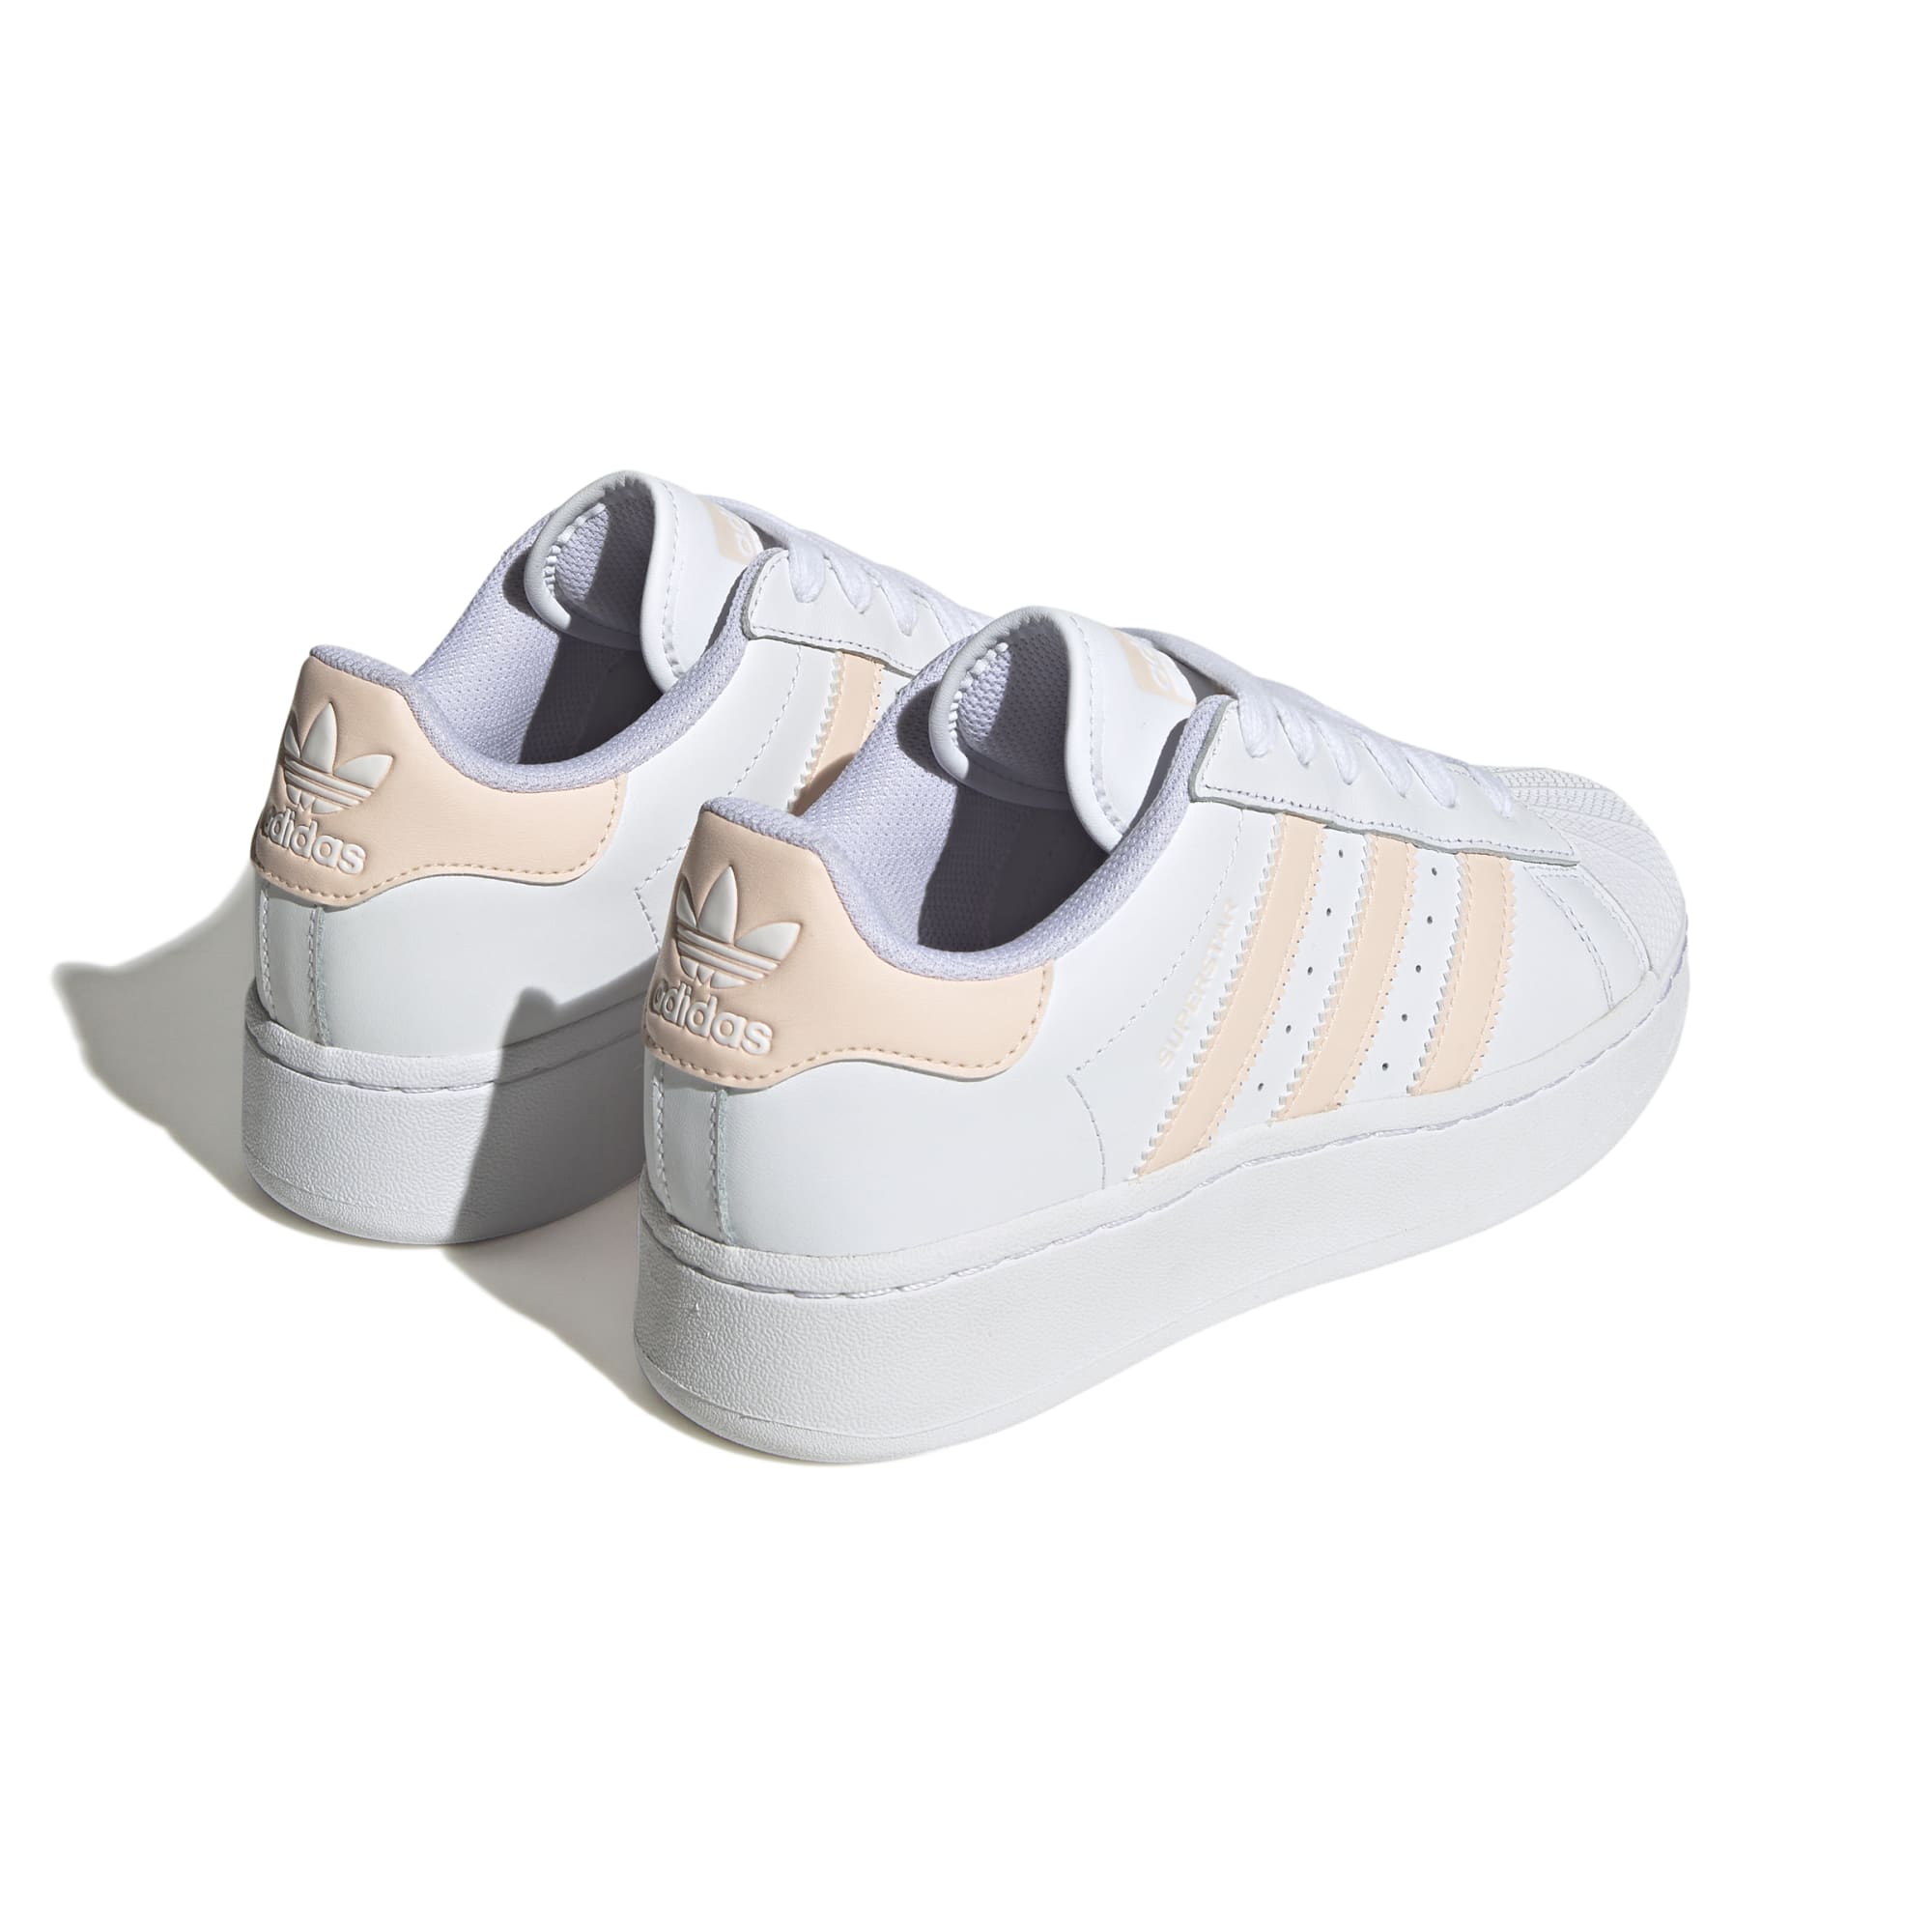 ADIDAS SUPERSTAR XLG W IF3004 SNEAKER (W)